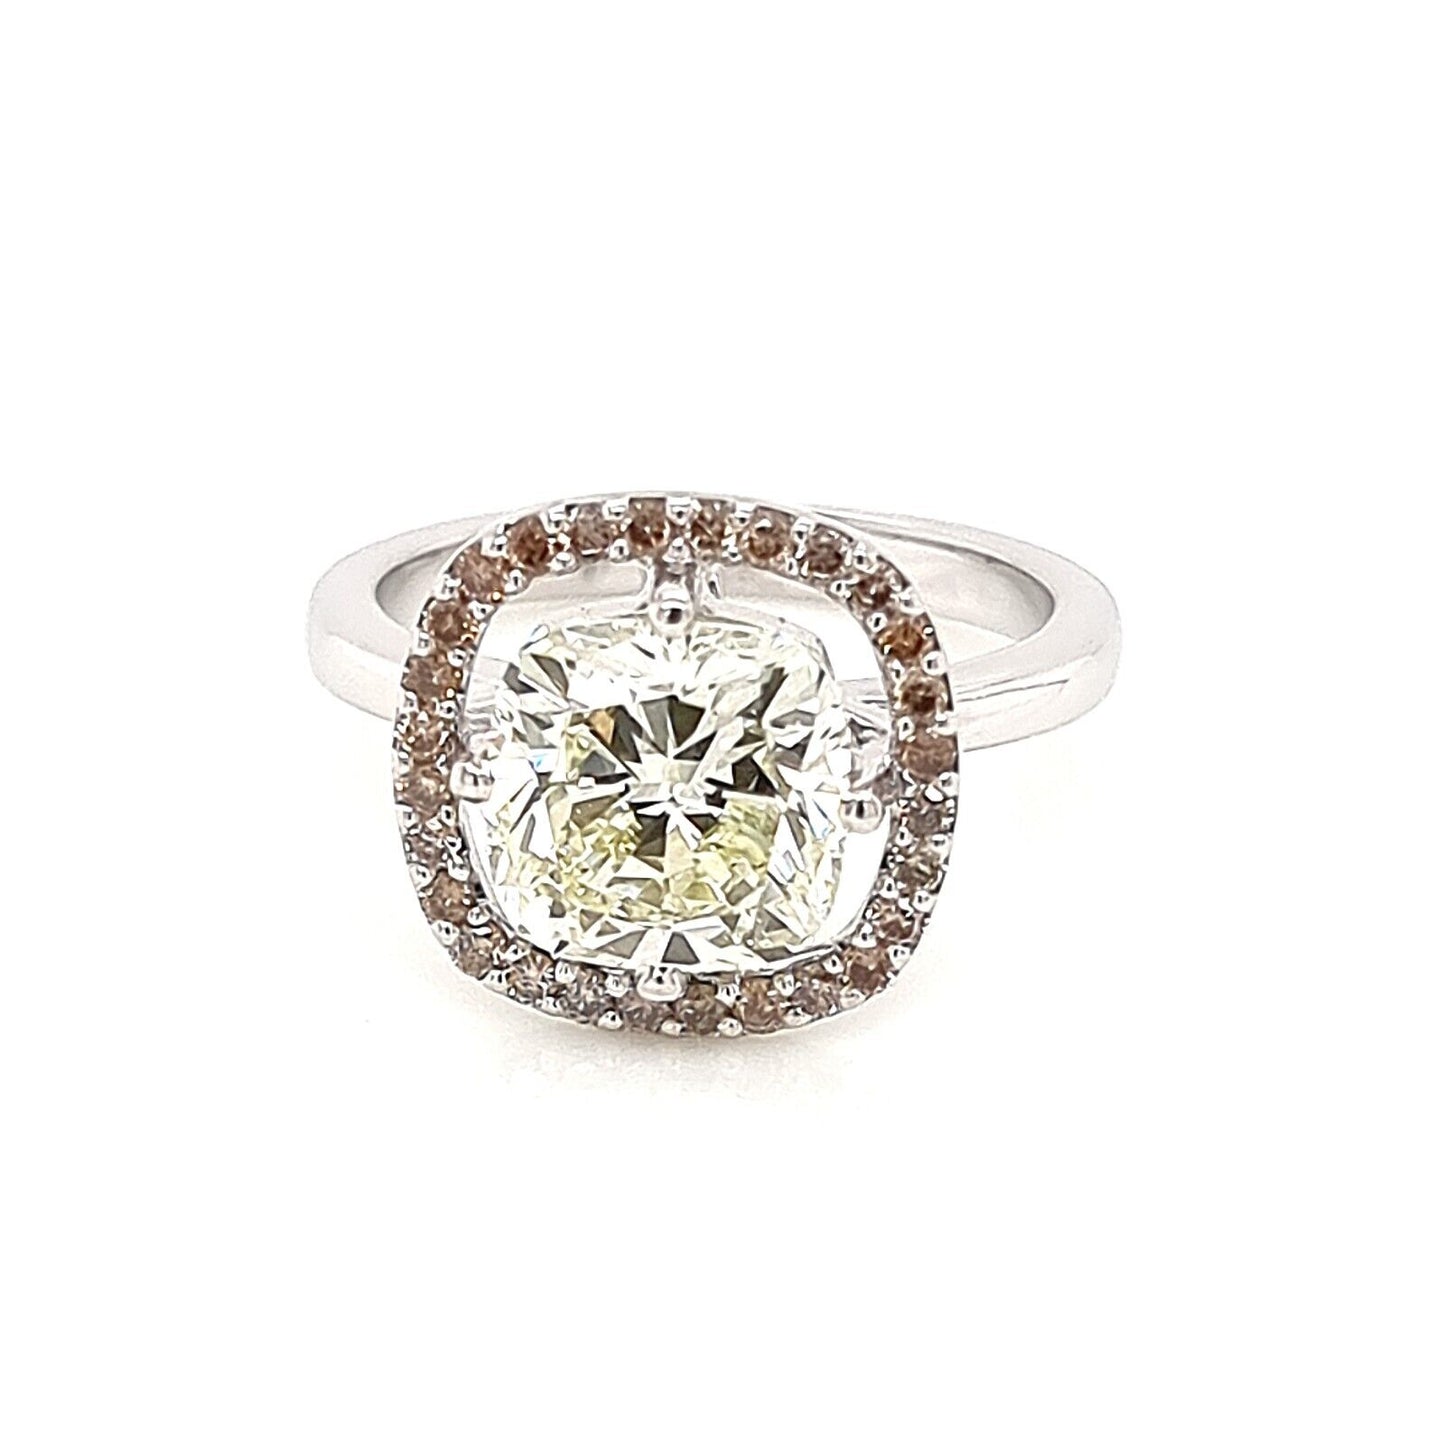 18K Gold Ring with Light Yellow Cushion Centre Diamond and Accent Brown Diamonds